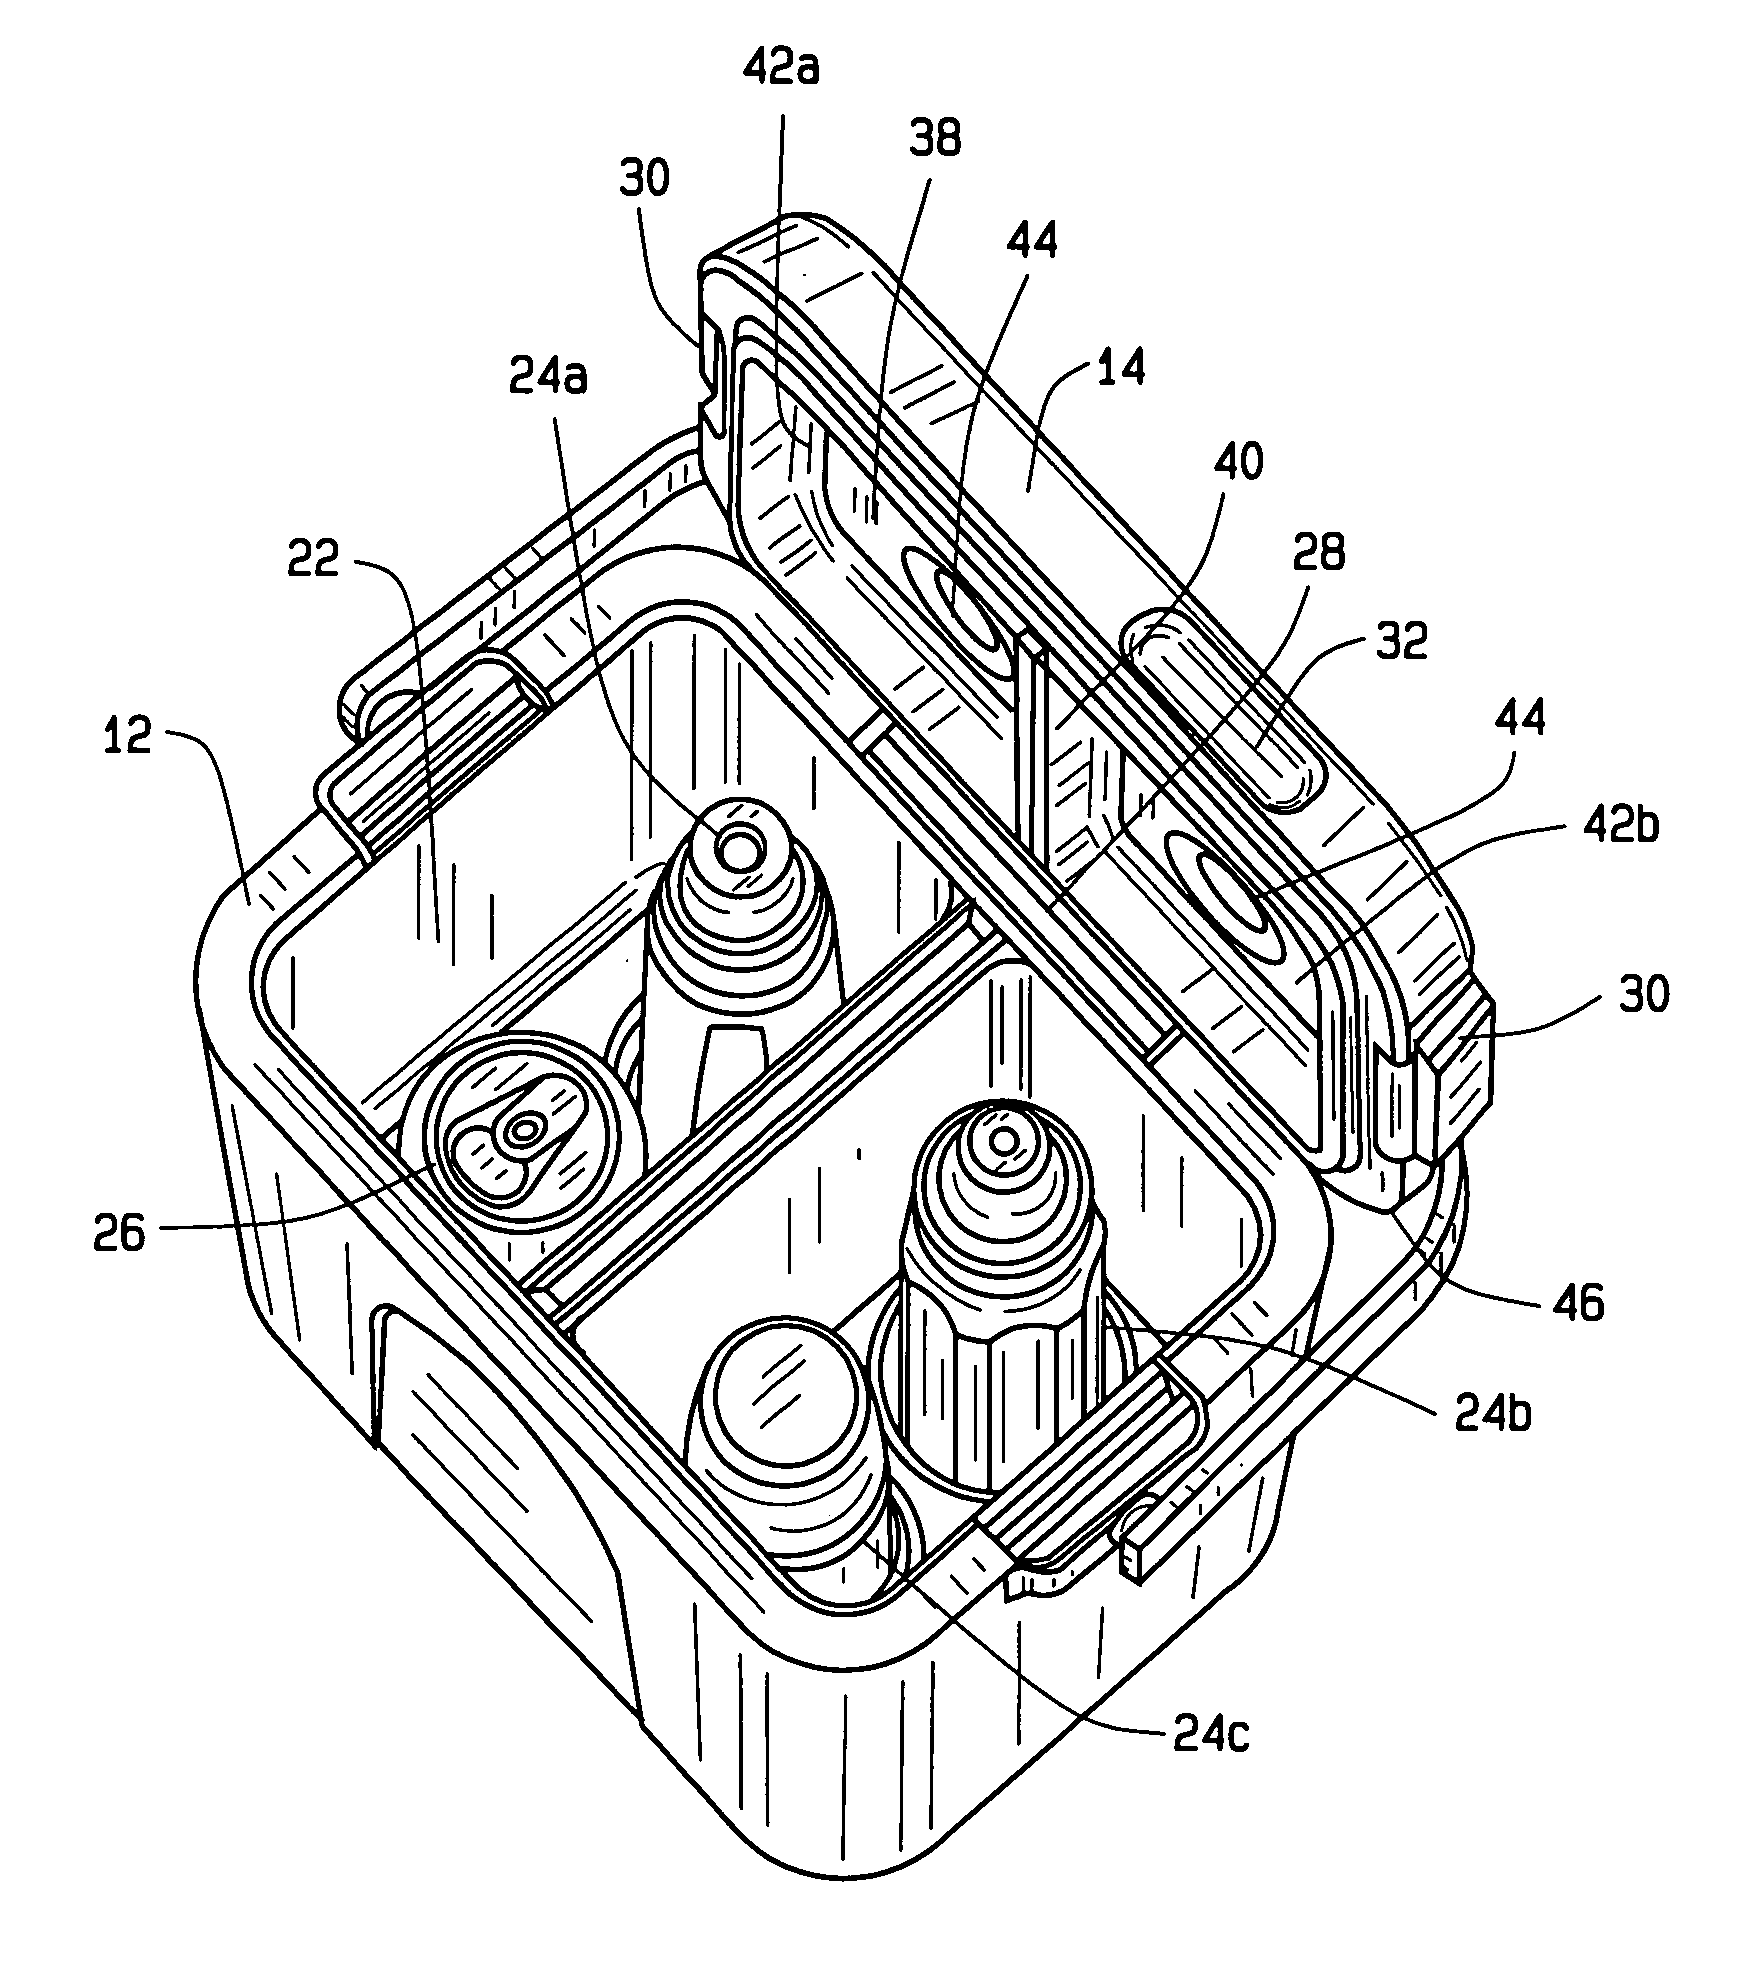 Insulated storage container having a removable liner